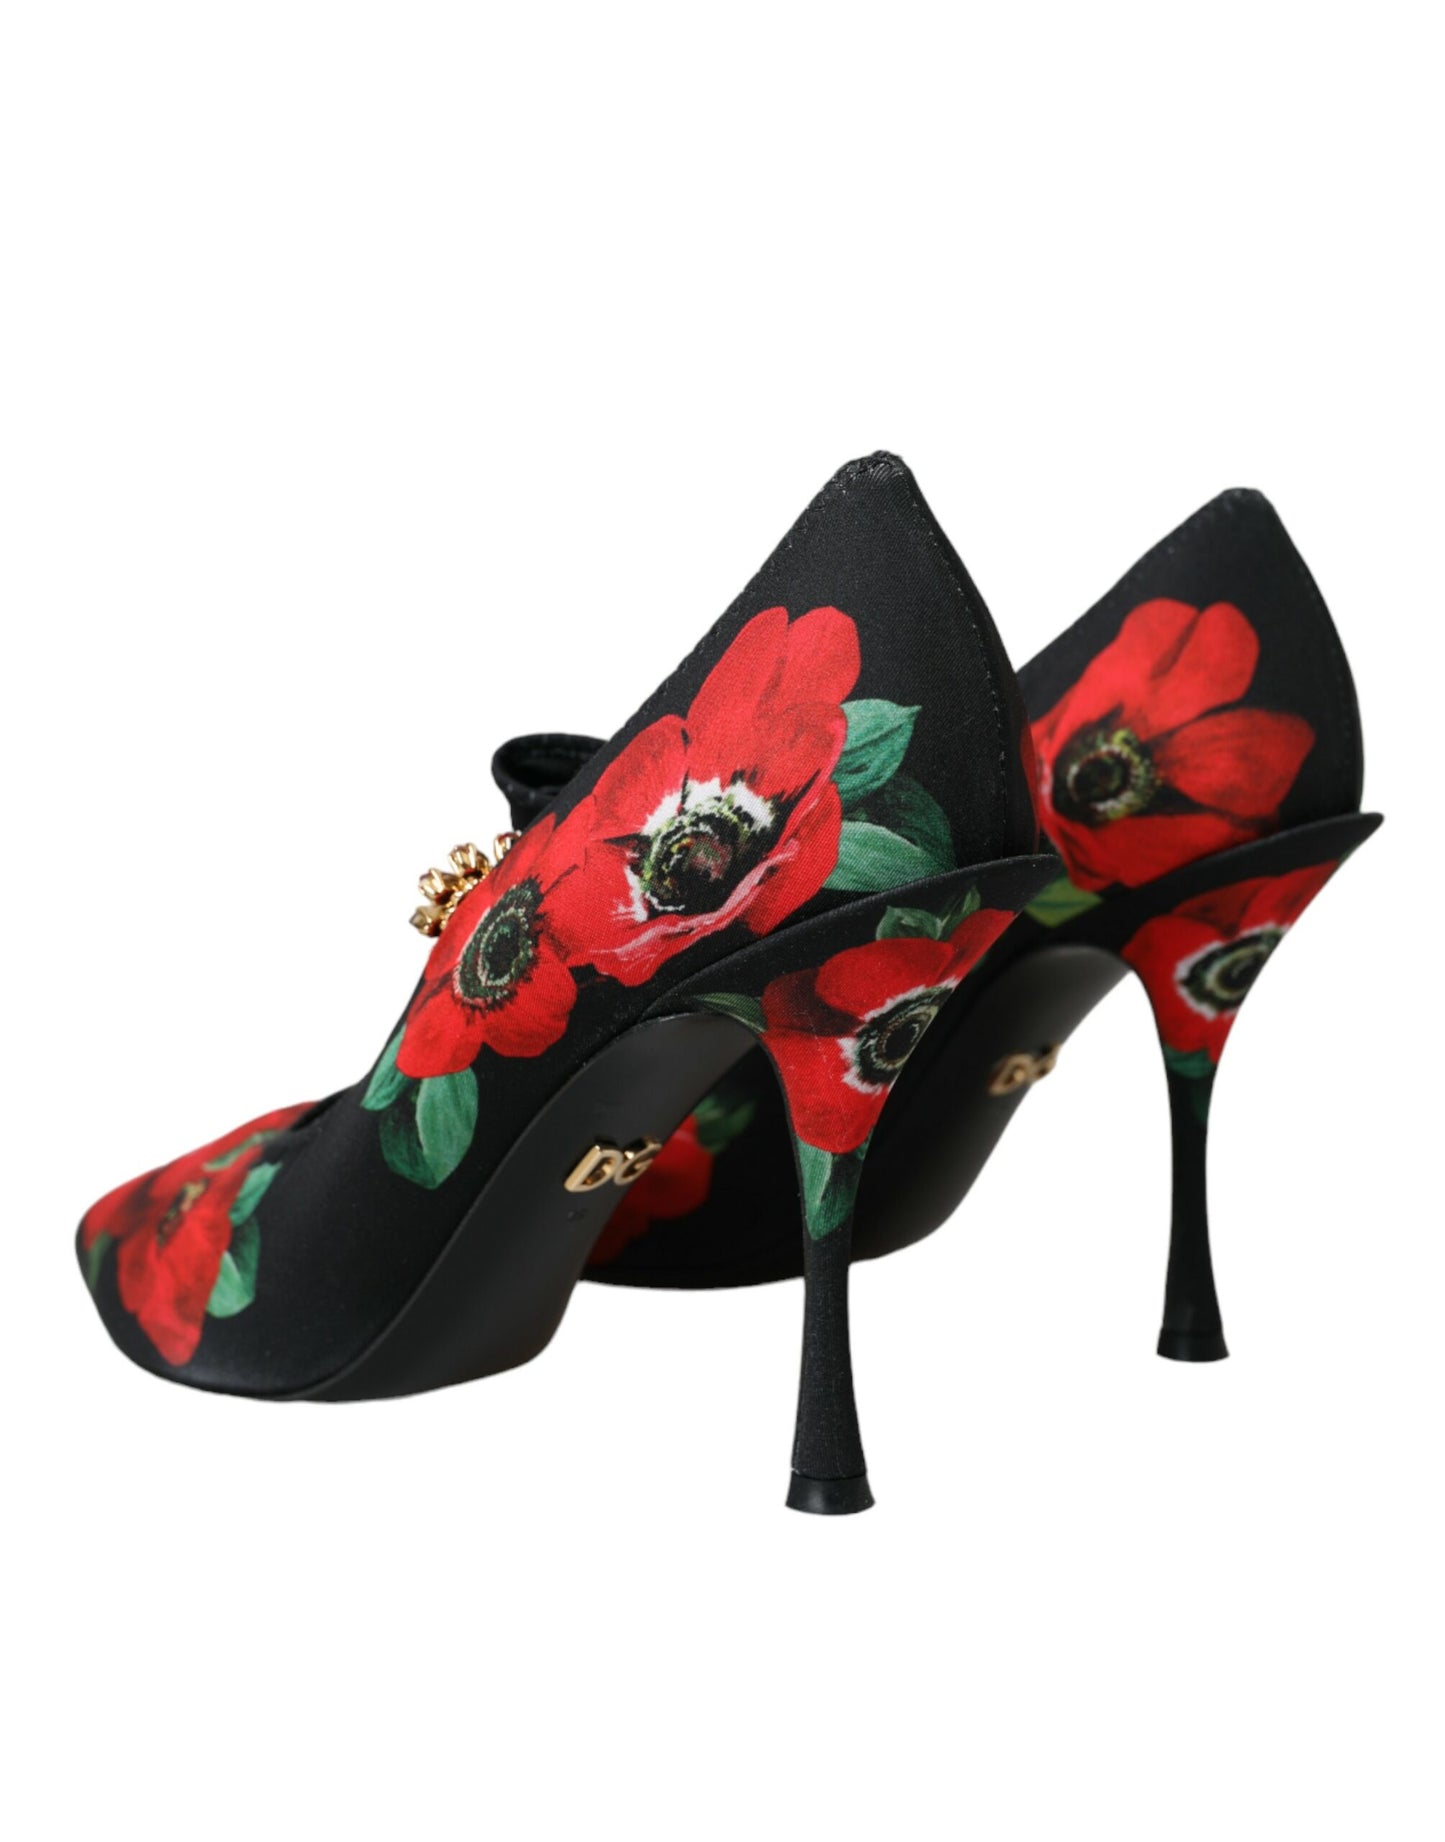 Black Floral Crystal Mary Jane Pumps Shoes